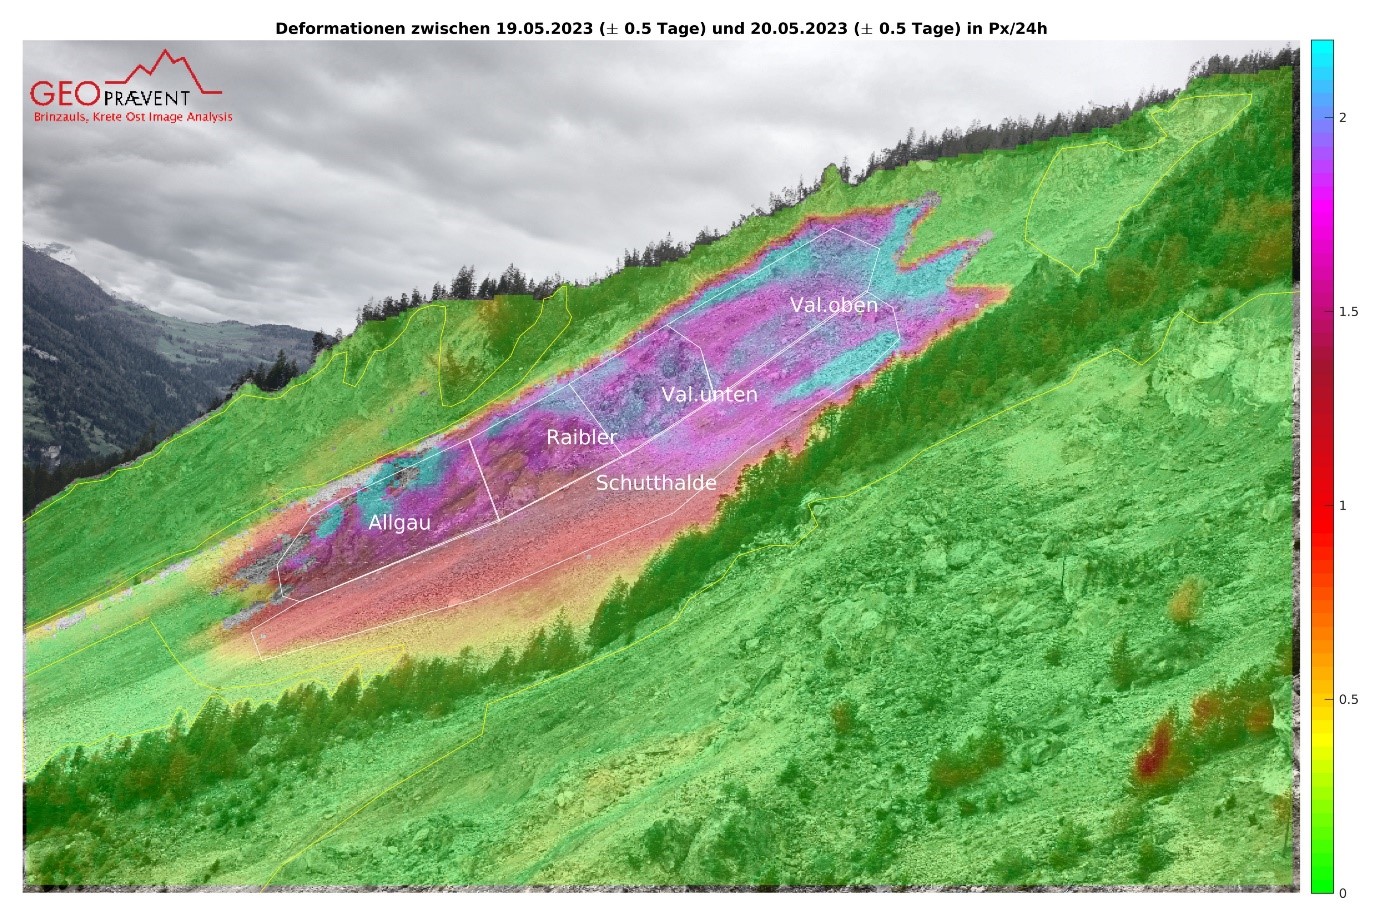 Figure 2: Digital Image correlation from time-lapse camera East looking towards West into “Insel” compartment, composed of Vallatscha dolomites, Raibler dolomites and rauhwackes, and Allgäu schists. Red line marks preliminary schematic interpretation of rupture surface and displacement vector dip angles. Displacement rates in pixel per day between May 19 and May 20, 2023.